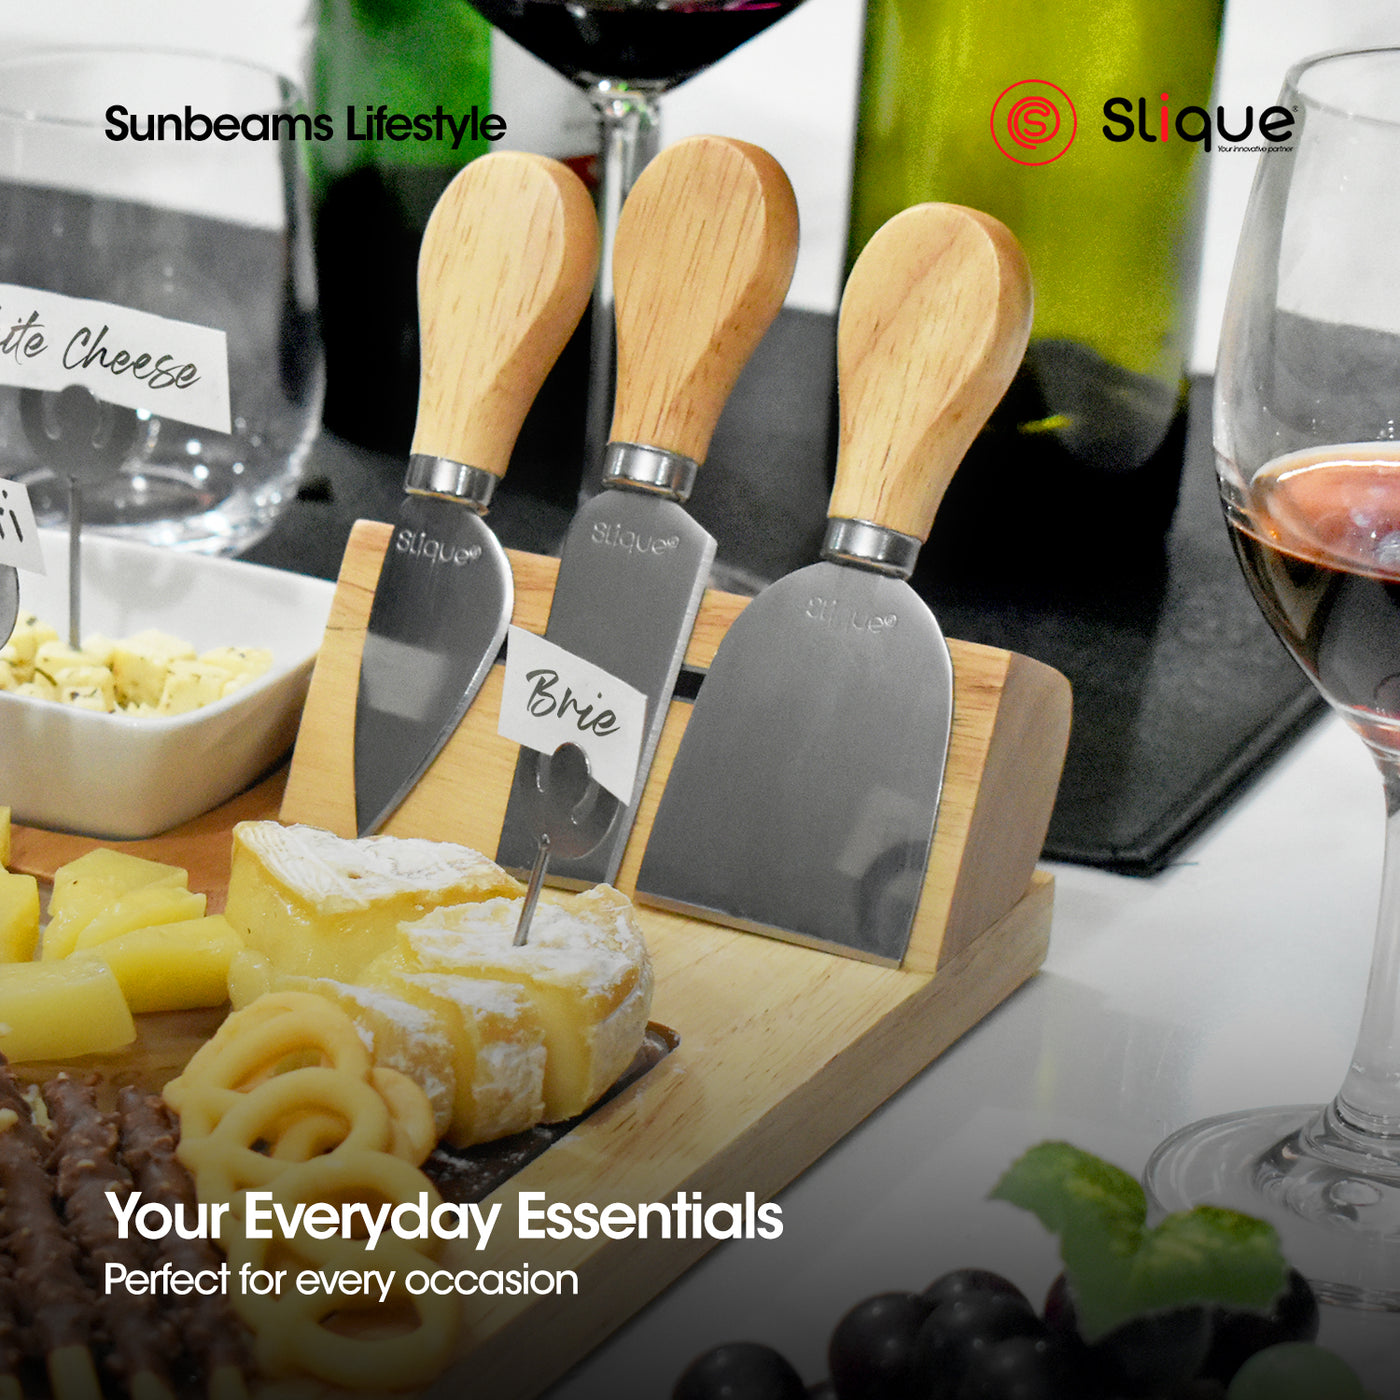 SLIQUE Premium Bamboo Cheese Board and Stainless Steel Cutlery Set Set of 10 Amazing Gift Idea For Any Occasion!